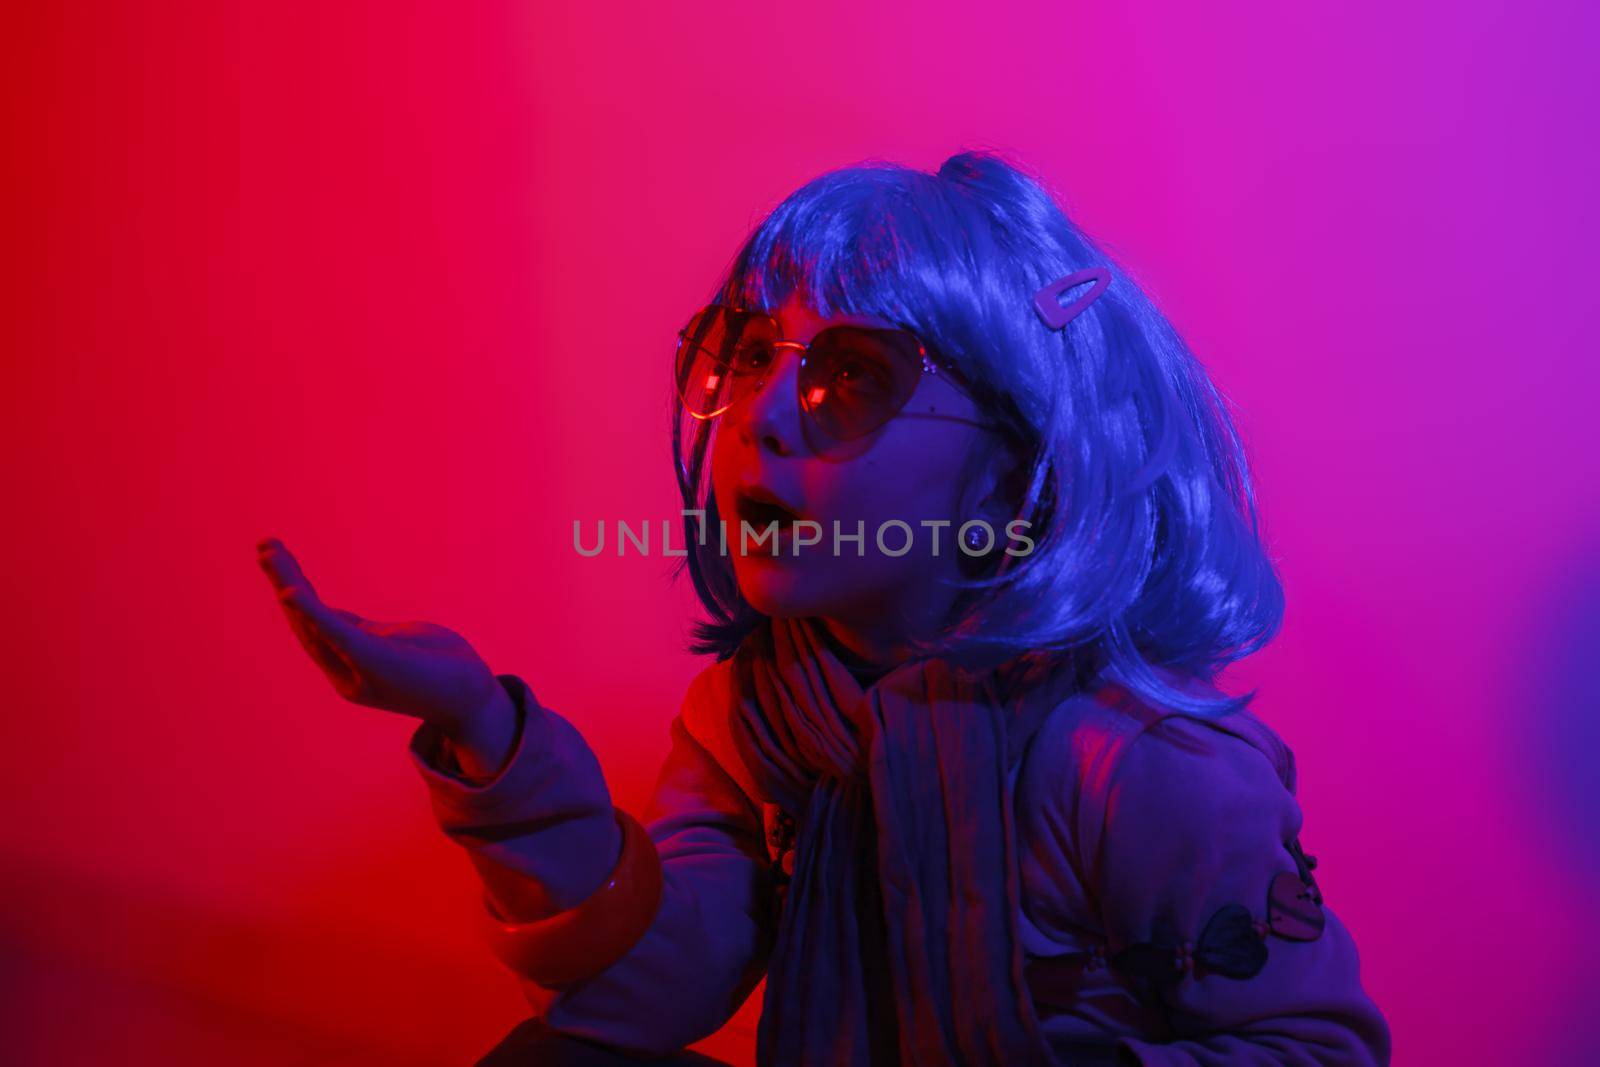 Little girl blowing kiss wearing a colorful wig and heart-shaped sunglasses by bepsimage